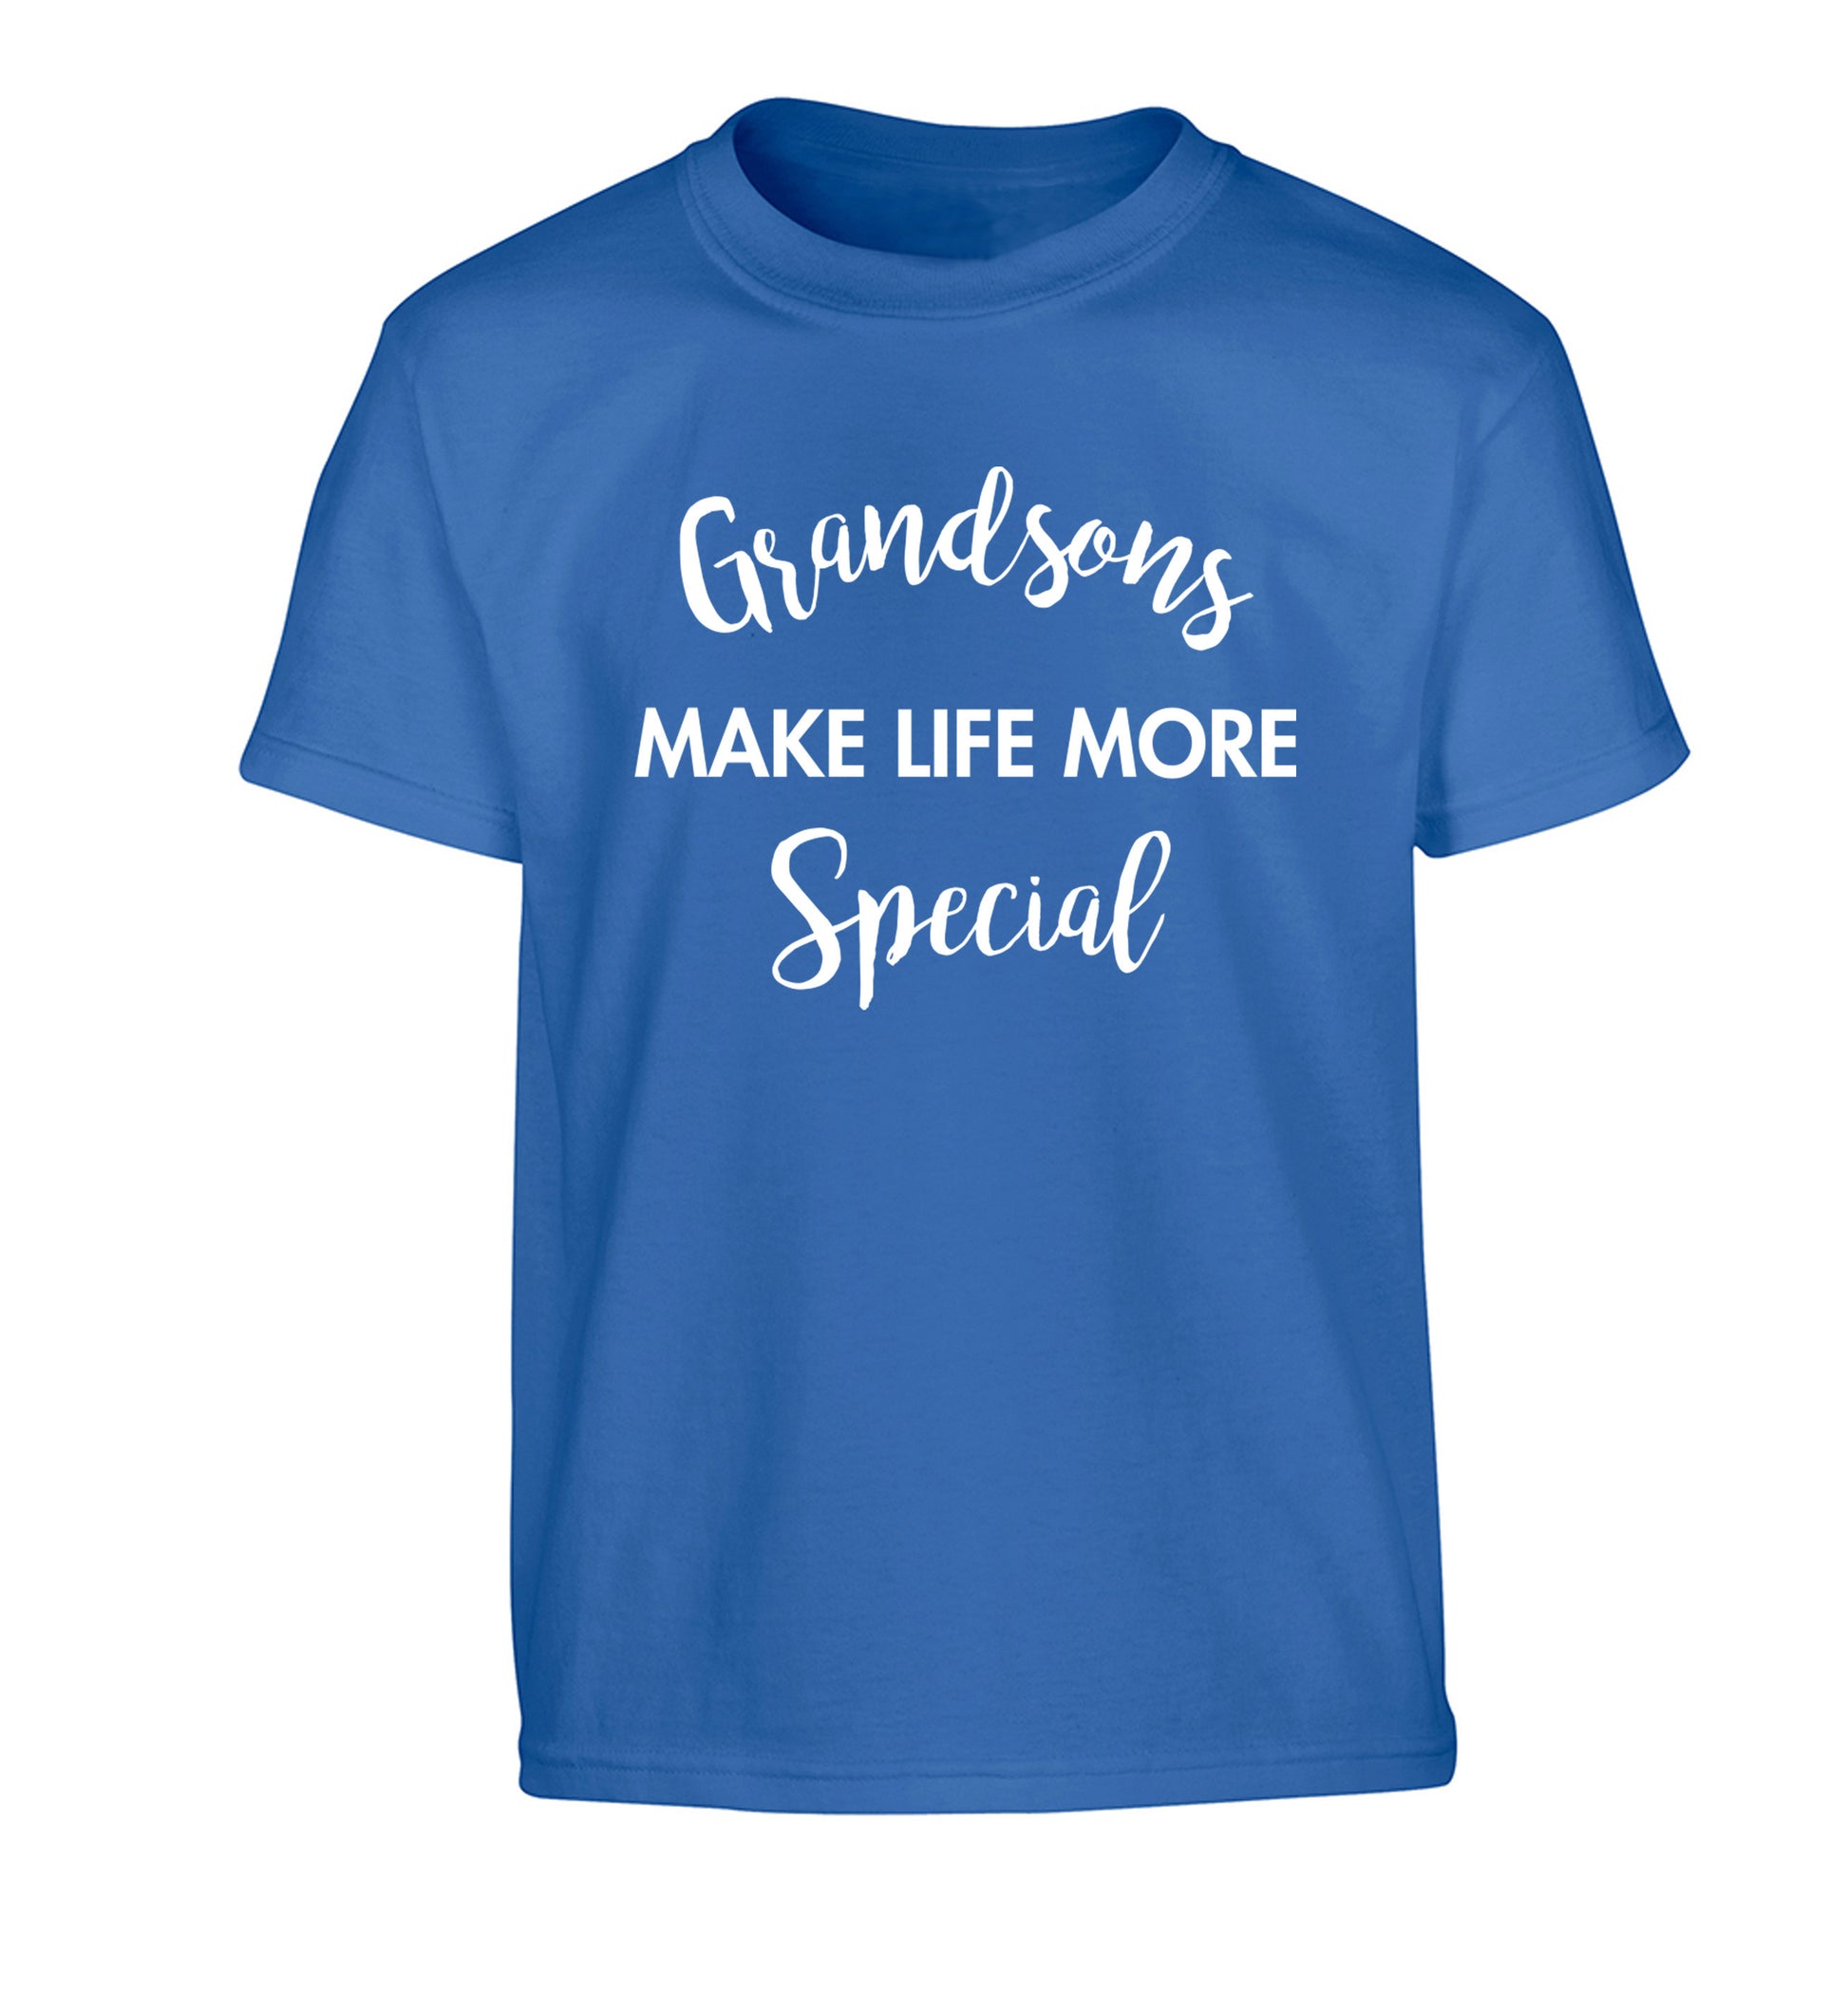 Grandsons make life more special Children's blue Tshirt 12-14 Years